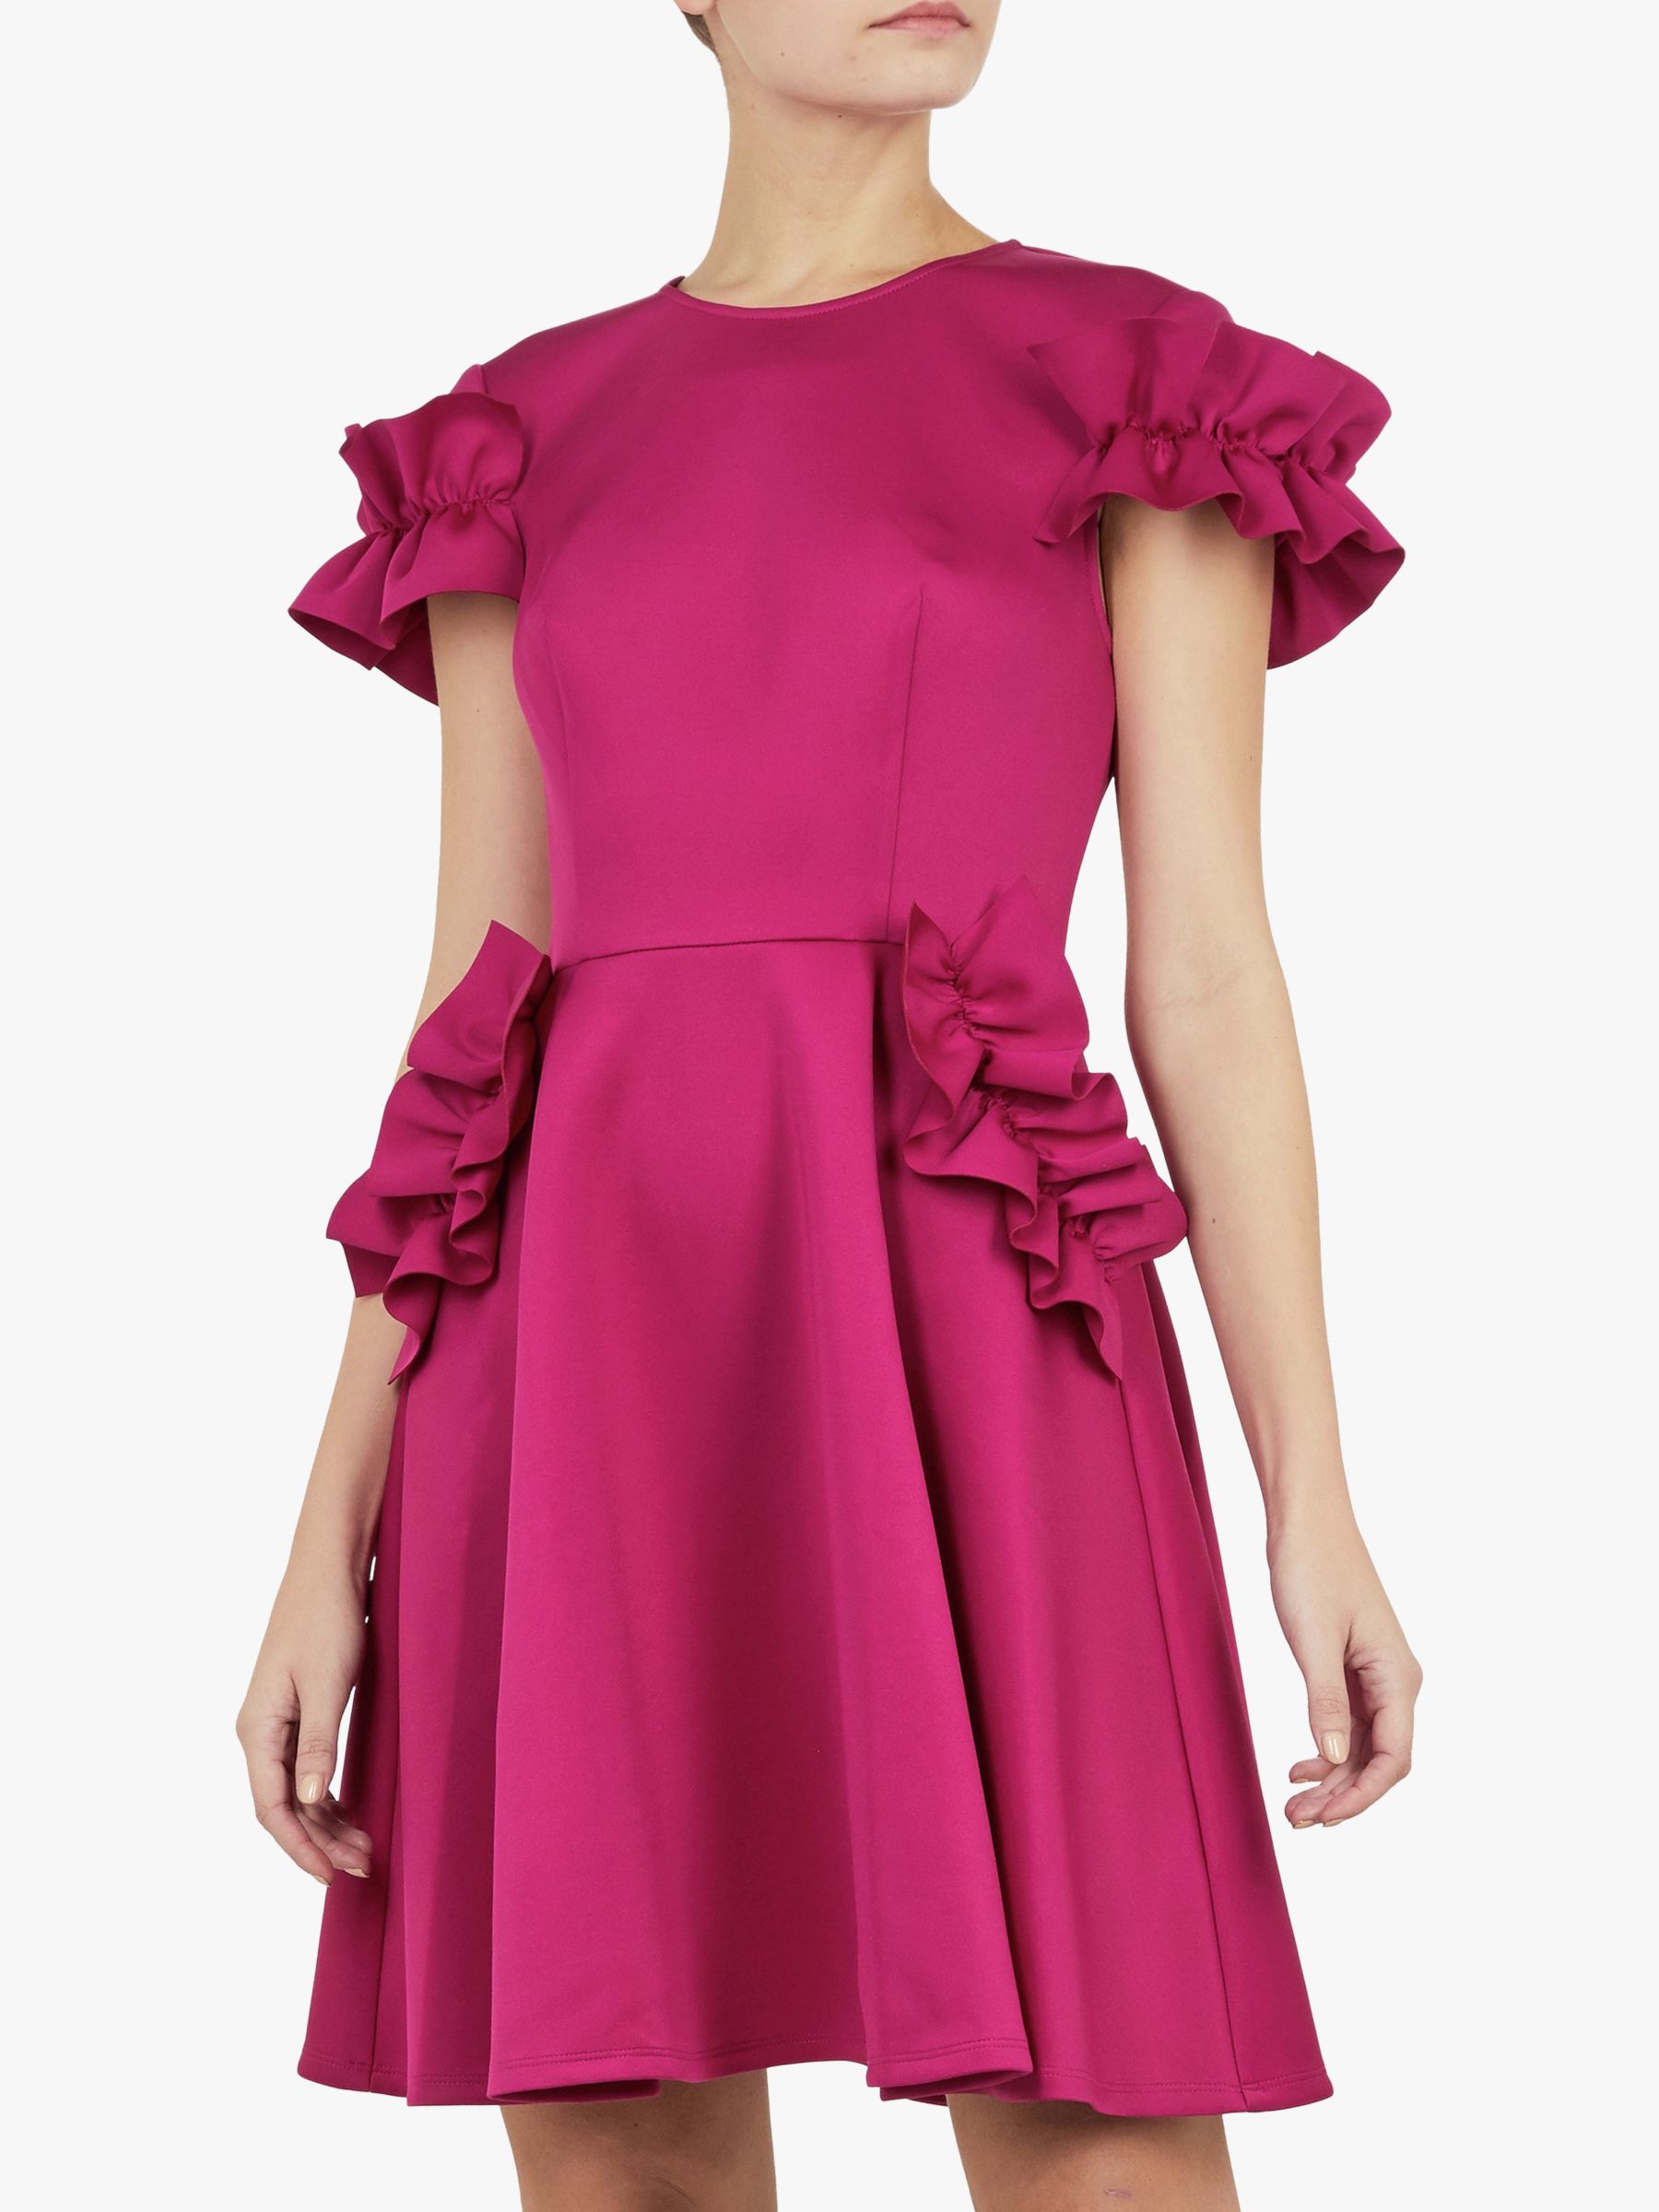 ted baker clothing online